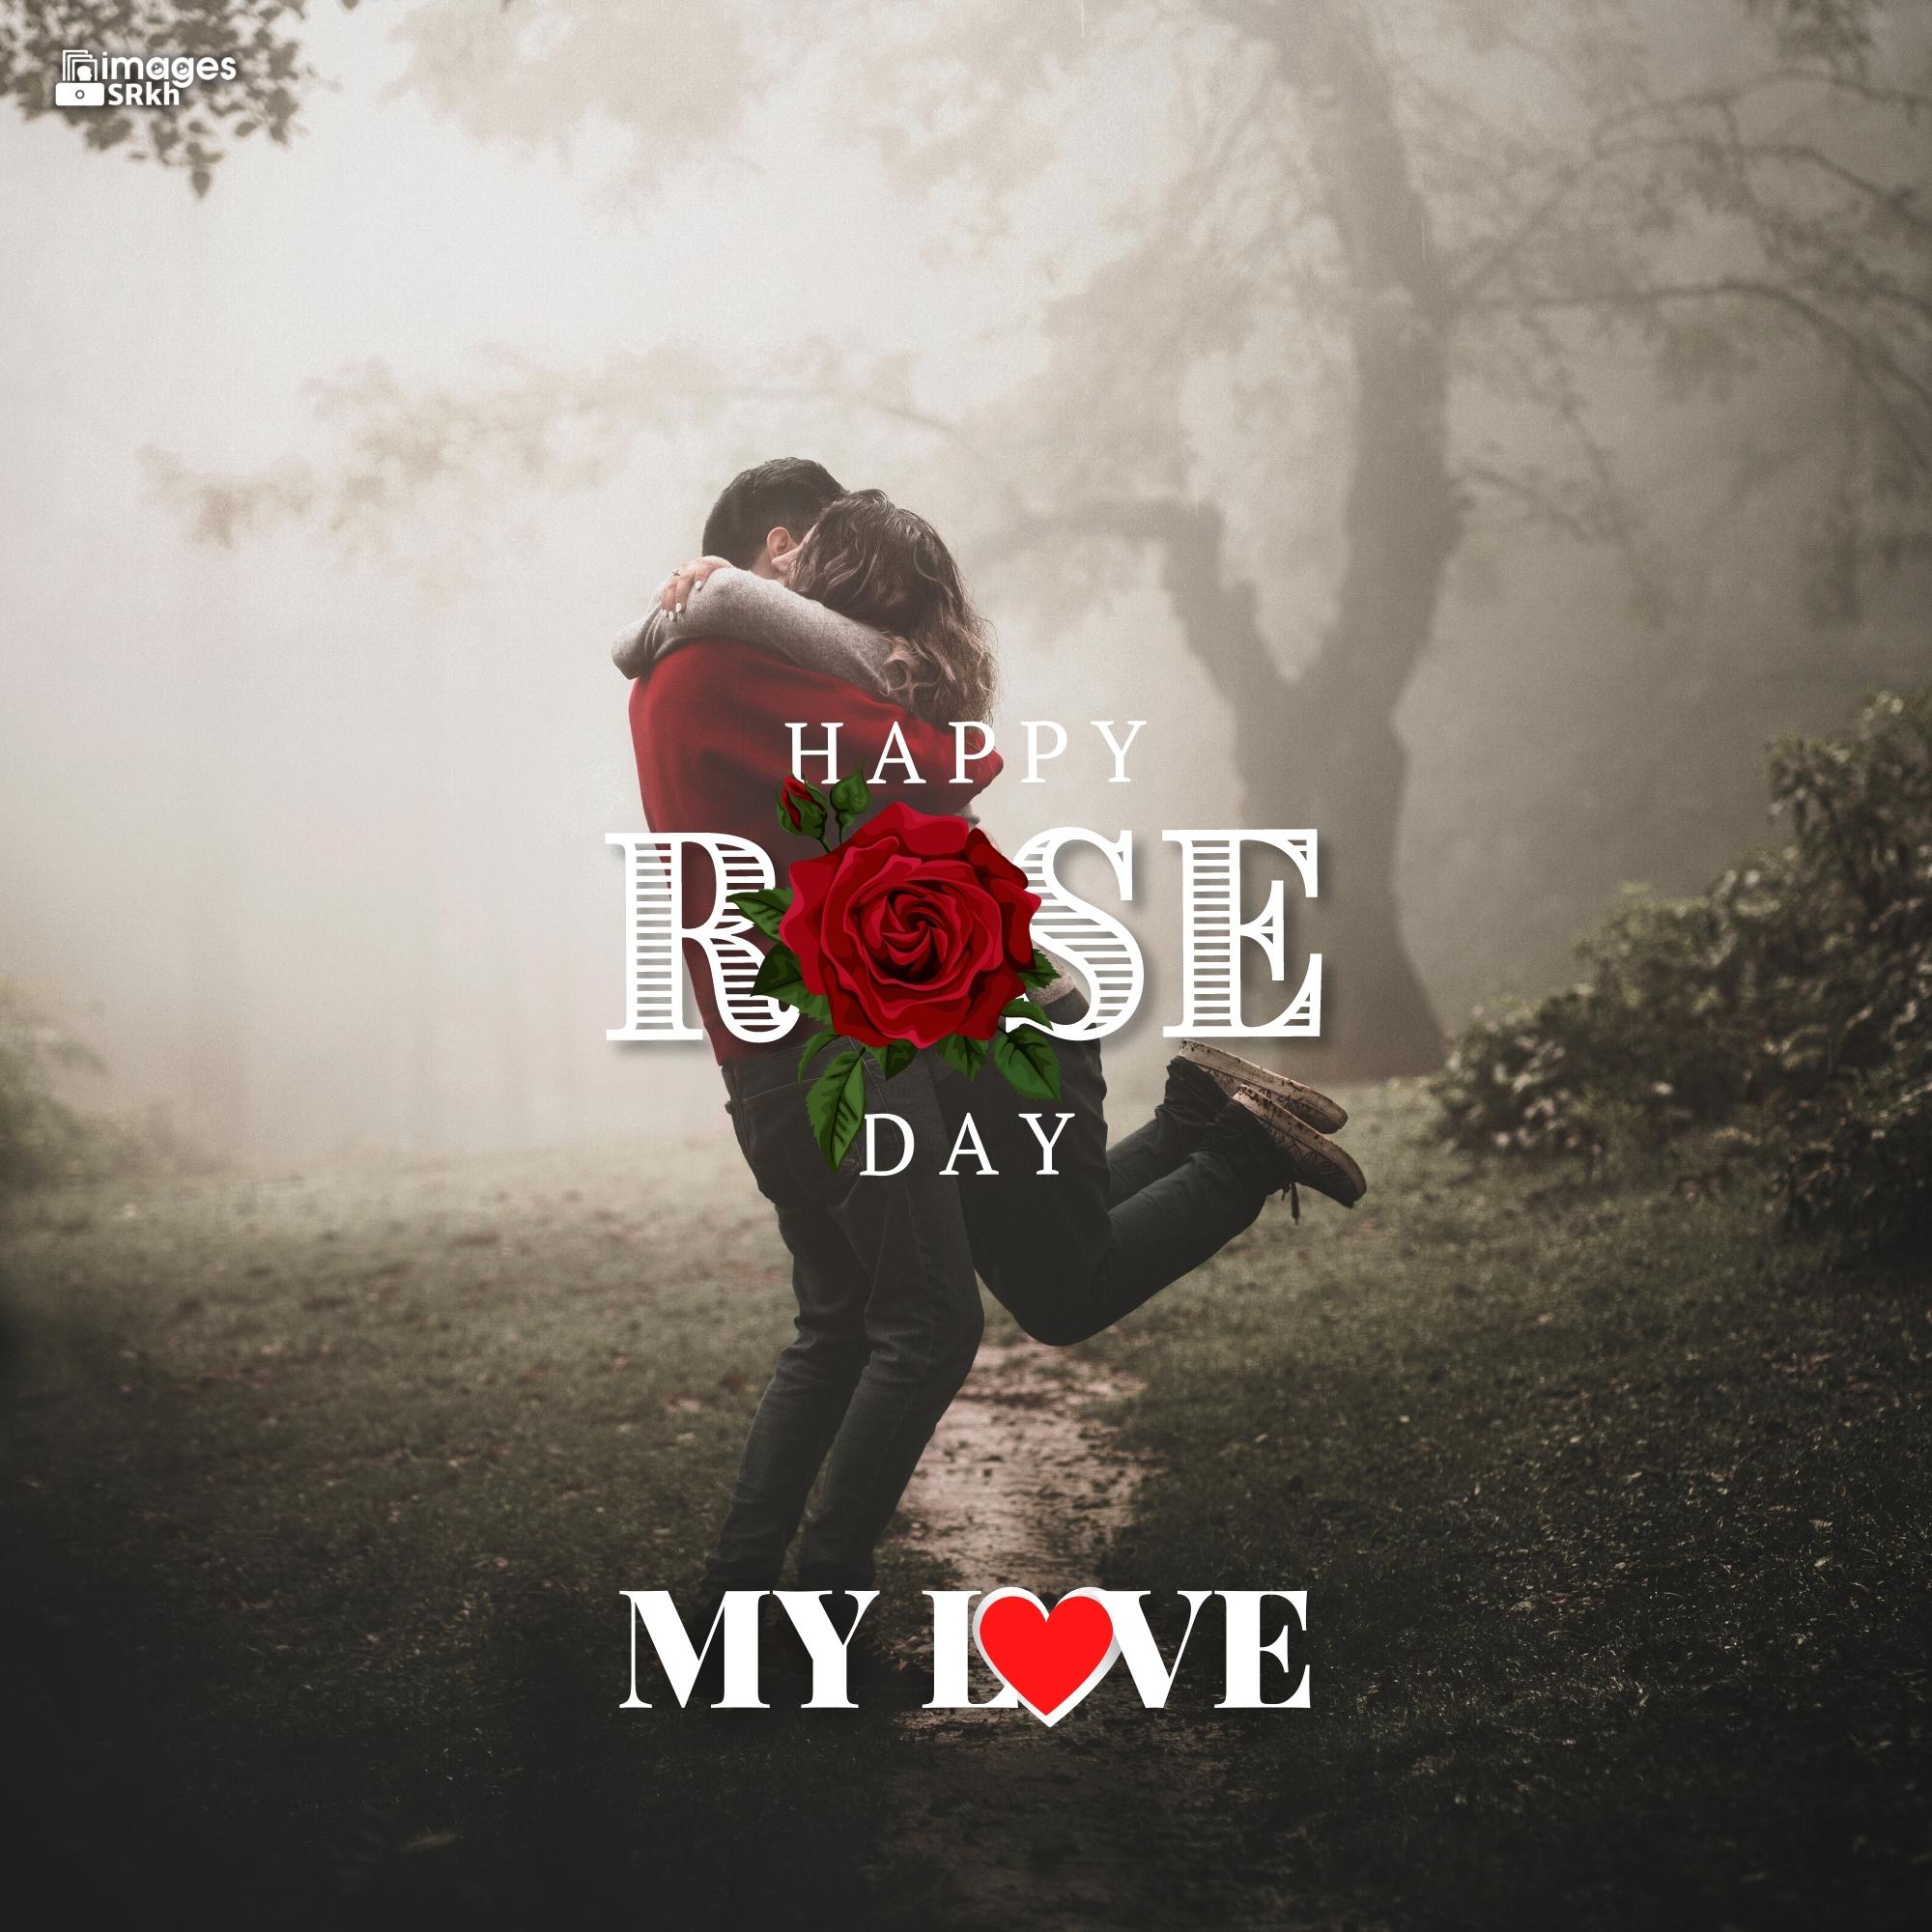 Happy Rose Day My Love (17) | HD IMAGES